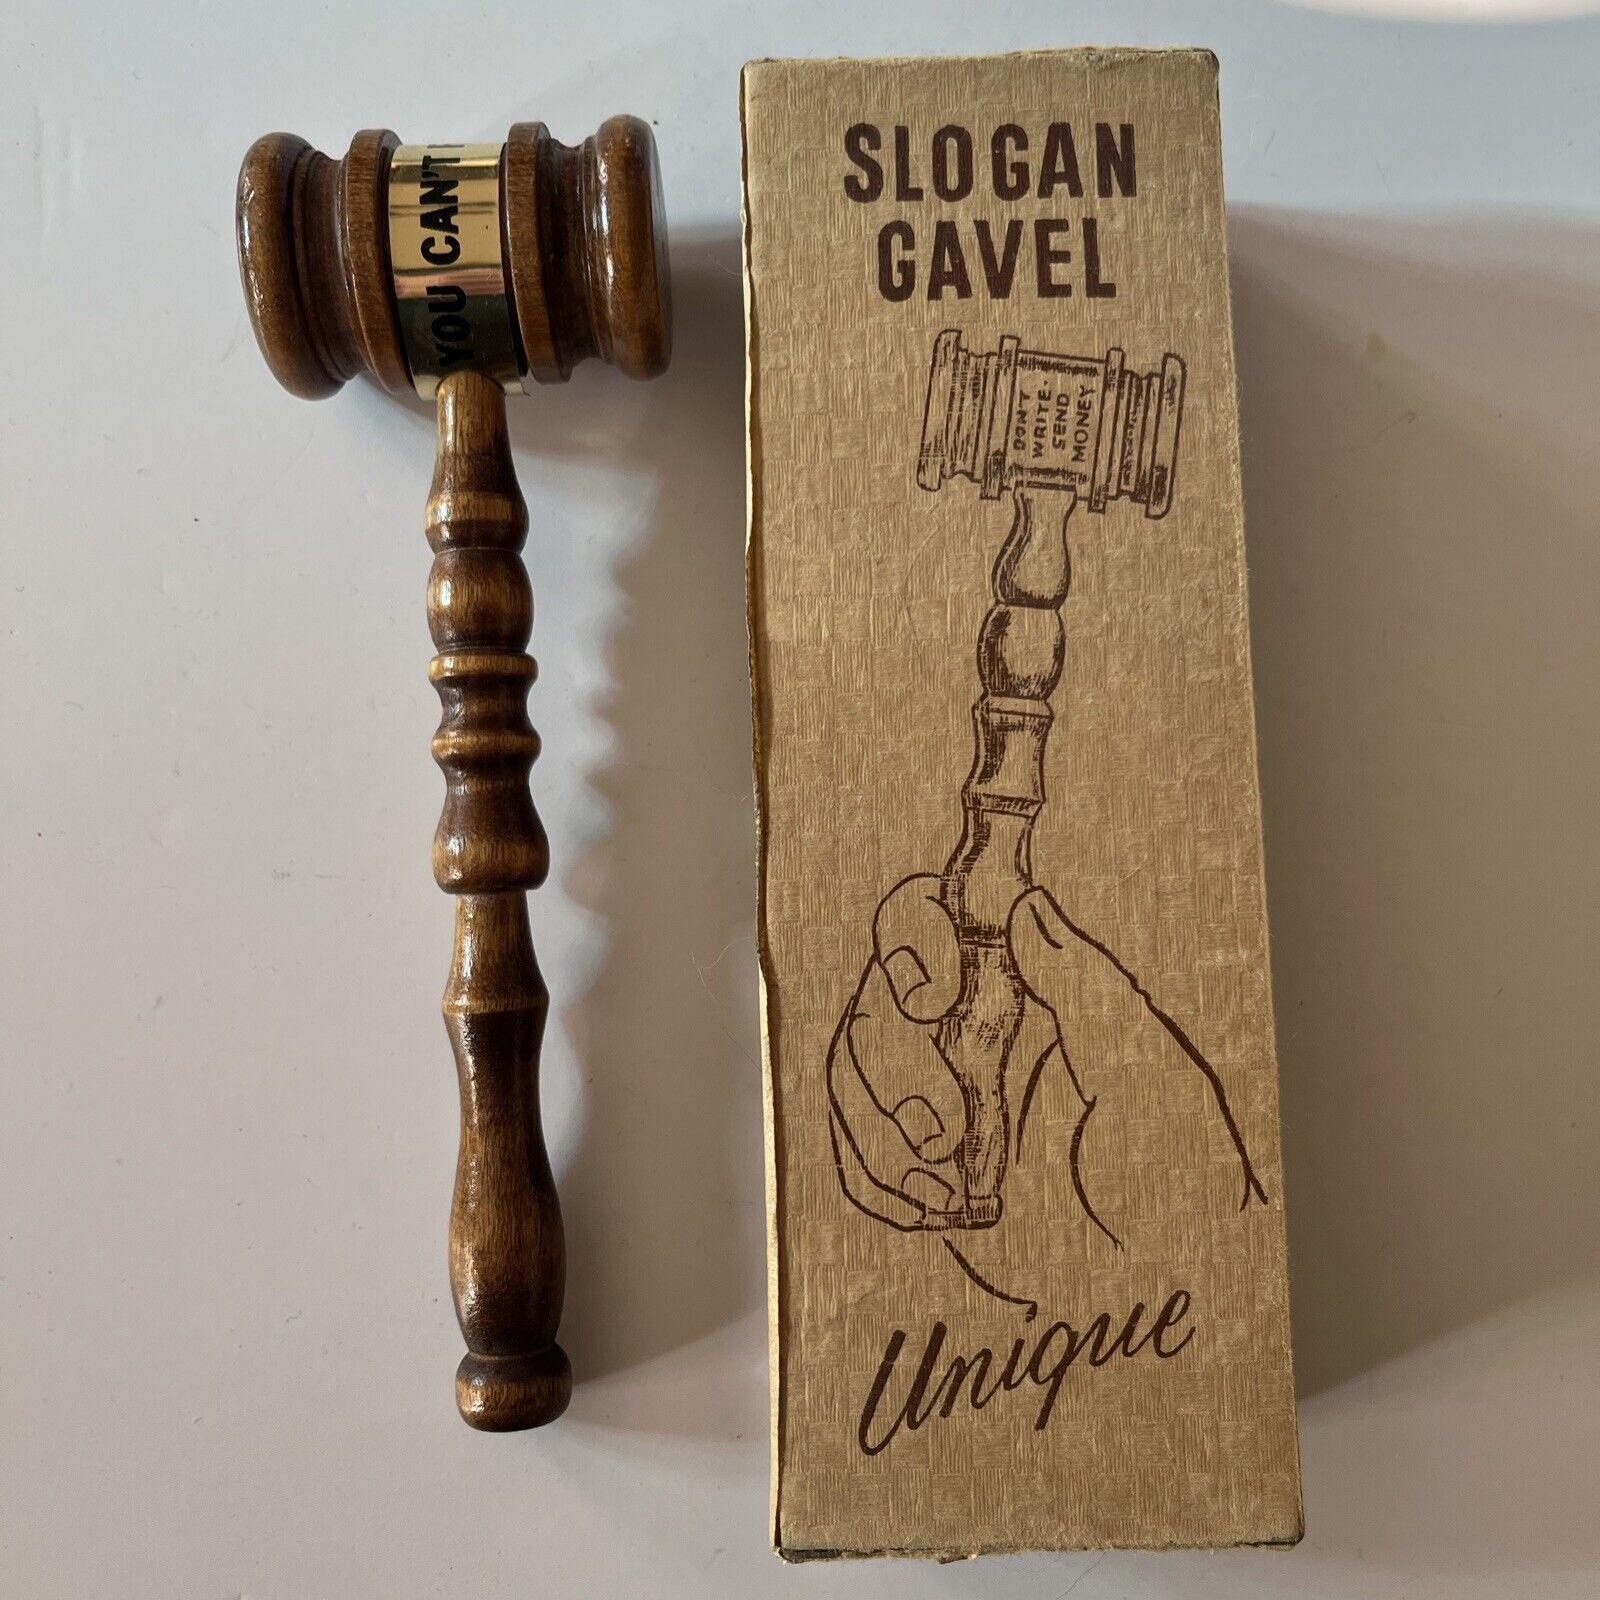 Vintage IOB Slogan Gavel “You Cant Fight City Hall